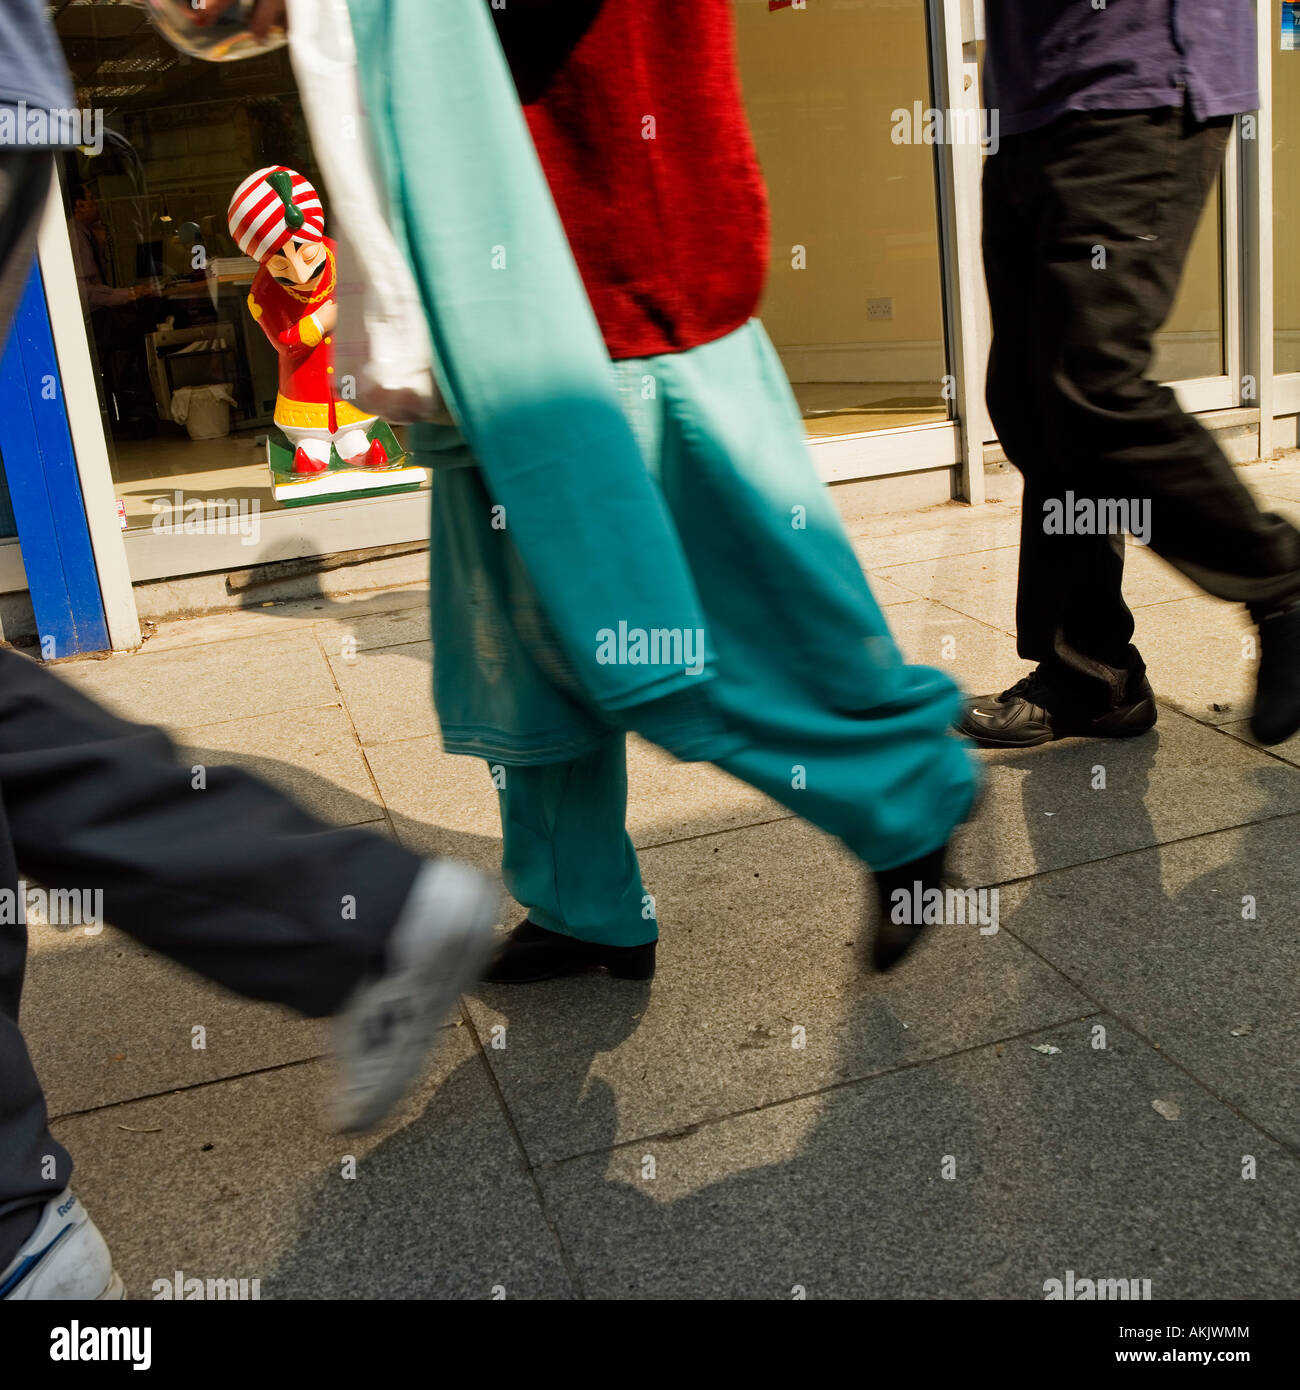 high street retail Southall West London no model release required crop means no one recognizable Stock Photo